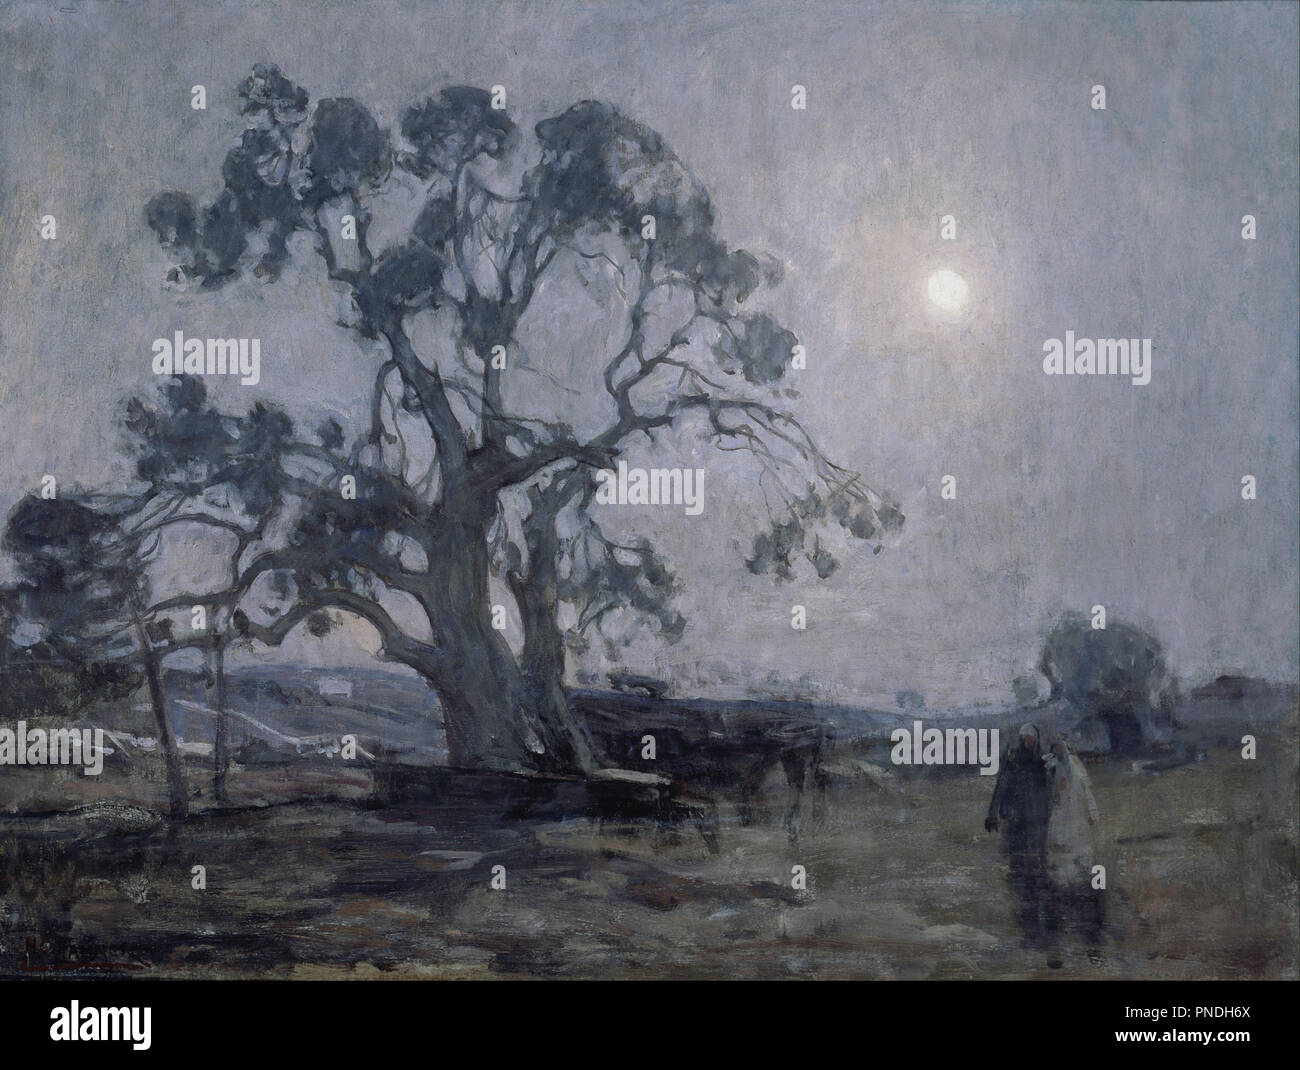 Abraham's Oak. Date/Period: 1905. Painting. Oil on canvas Oil on canvas. Height: 543.05 mm (21.37 in); Width: 727.20 mm (28.62 in). Author: HENRY OSSAWA TANNER. Stock Photo